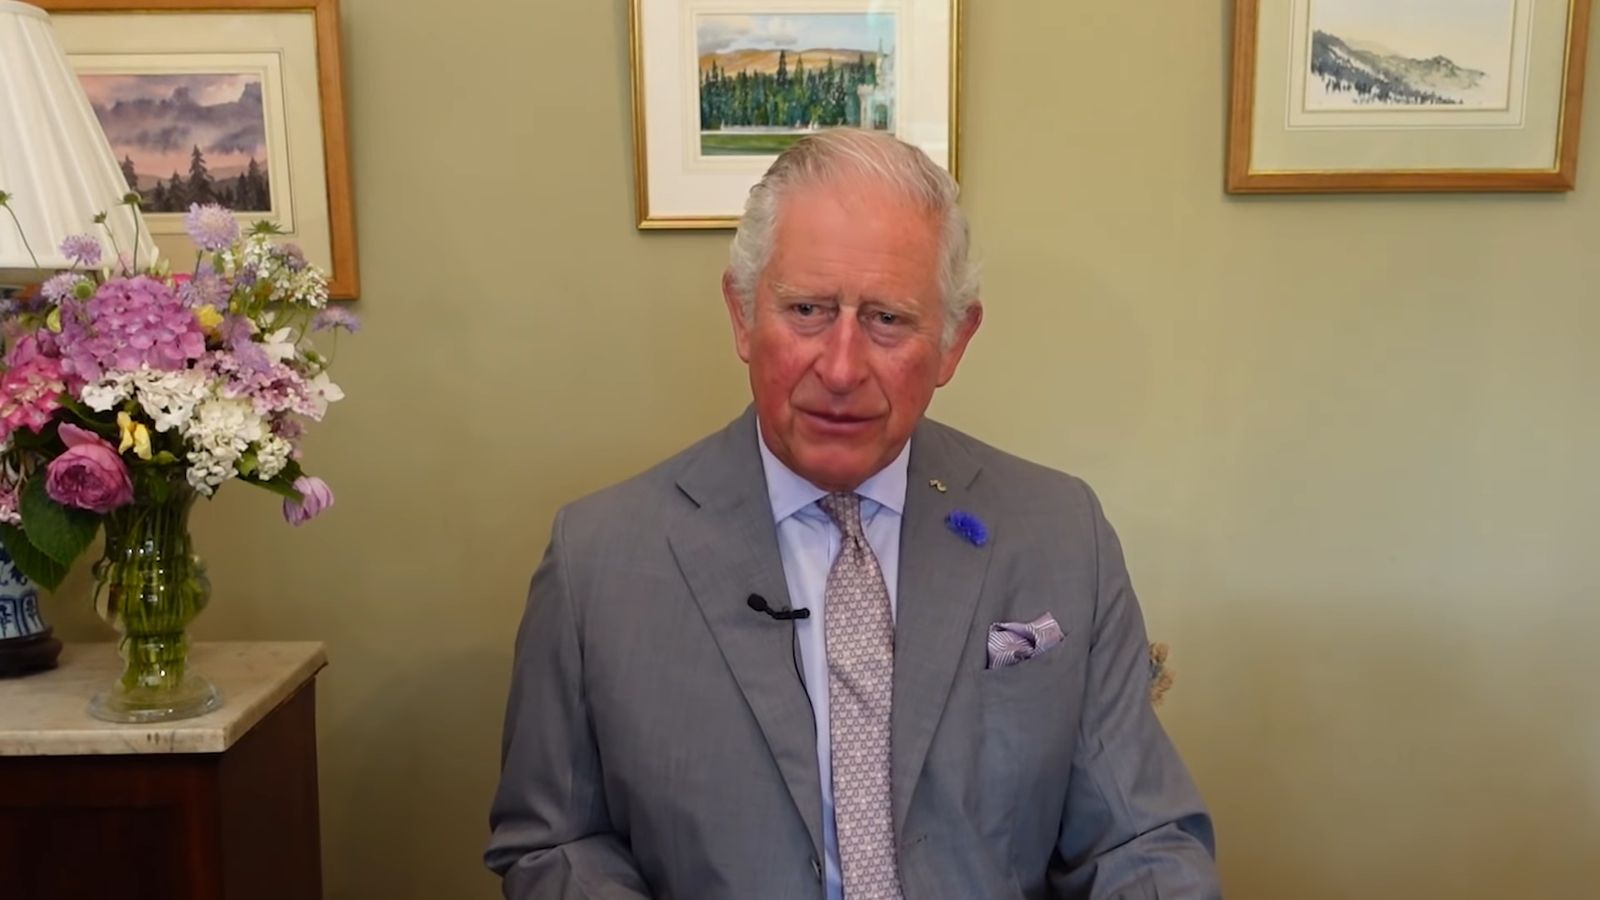 prince-charles-shock-heir-reportedly-needs-prince-harry-meghan-markle-to-return-when-he-ascends-the-throne-royal-expert-claims